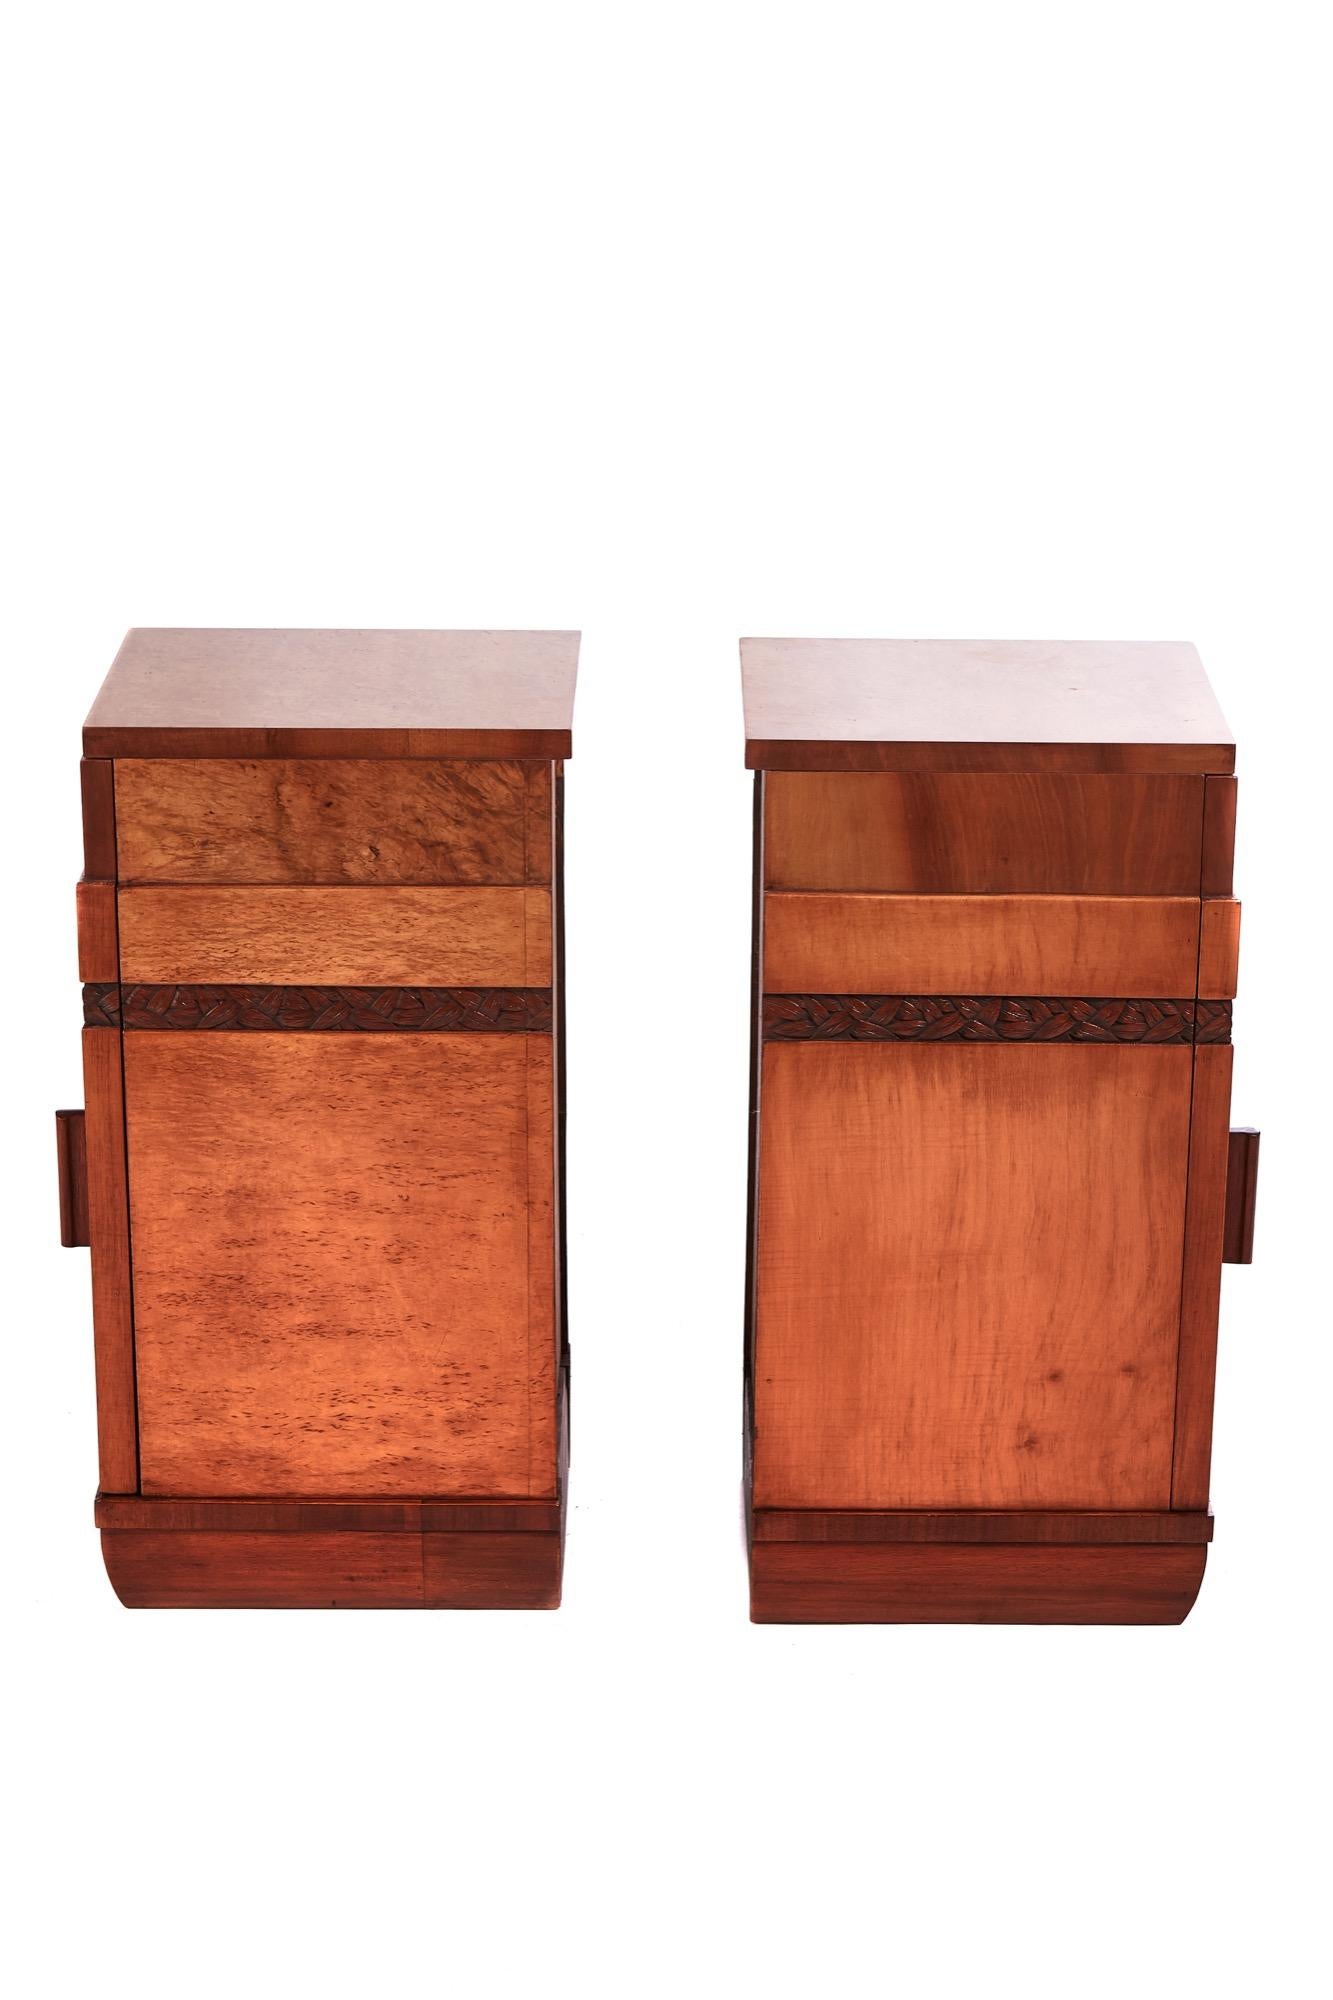 20th Century Quality Pair of Art Deco Bird’s-Eye Maple Bedside Cabinets